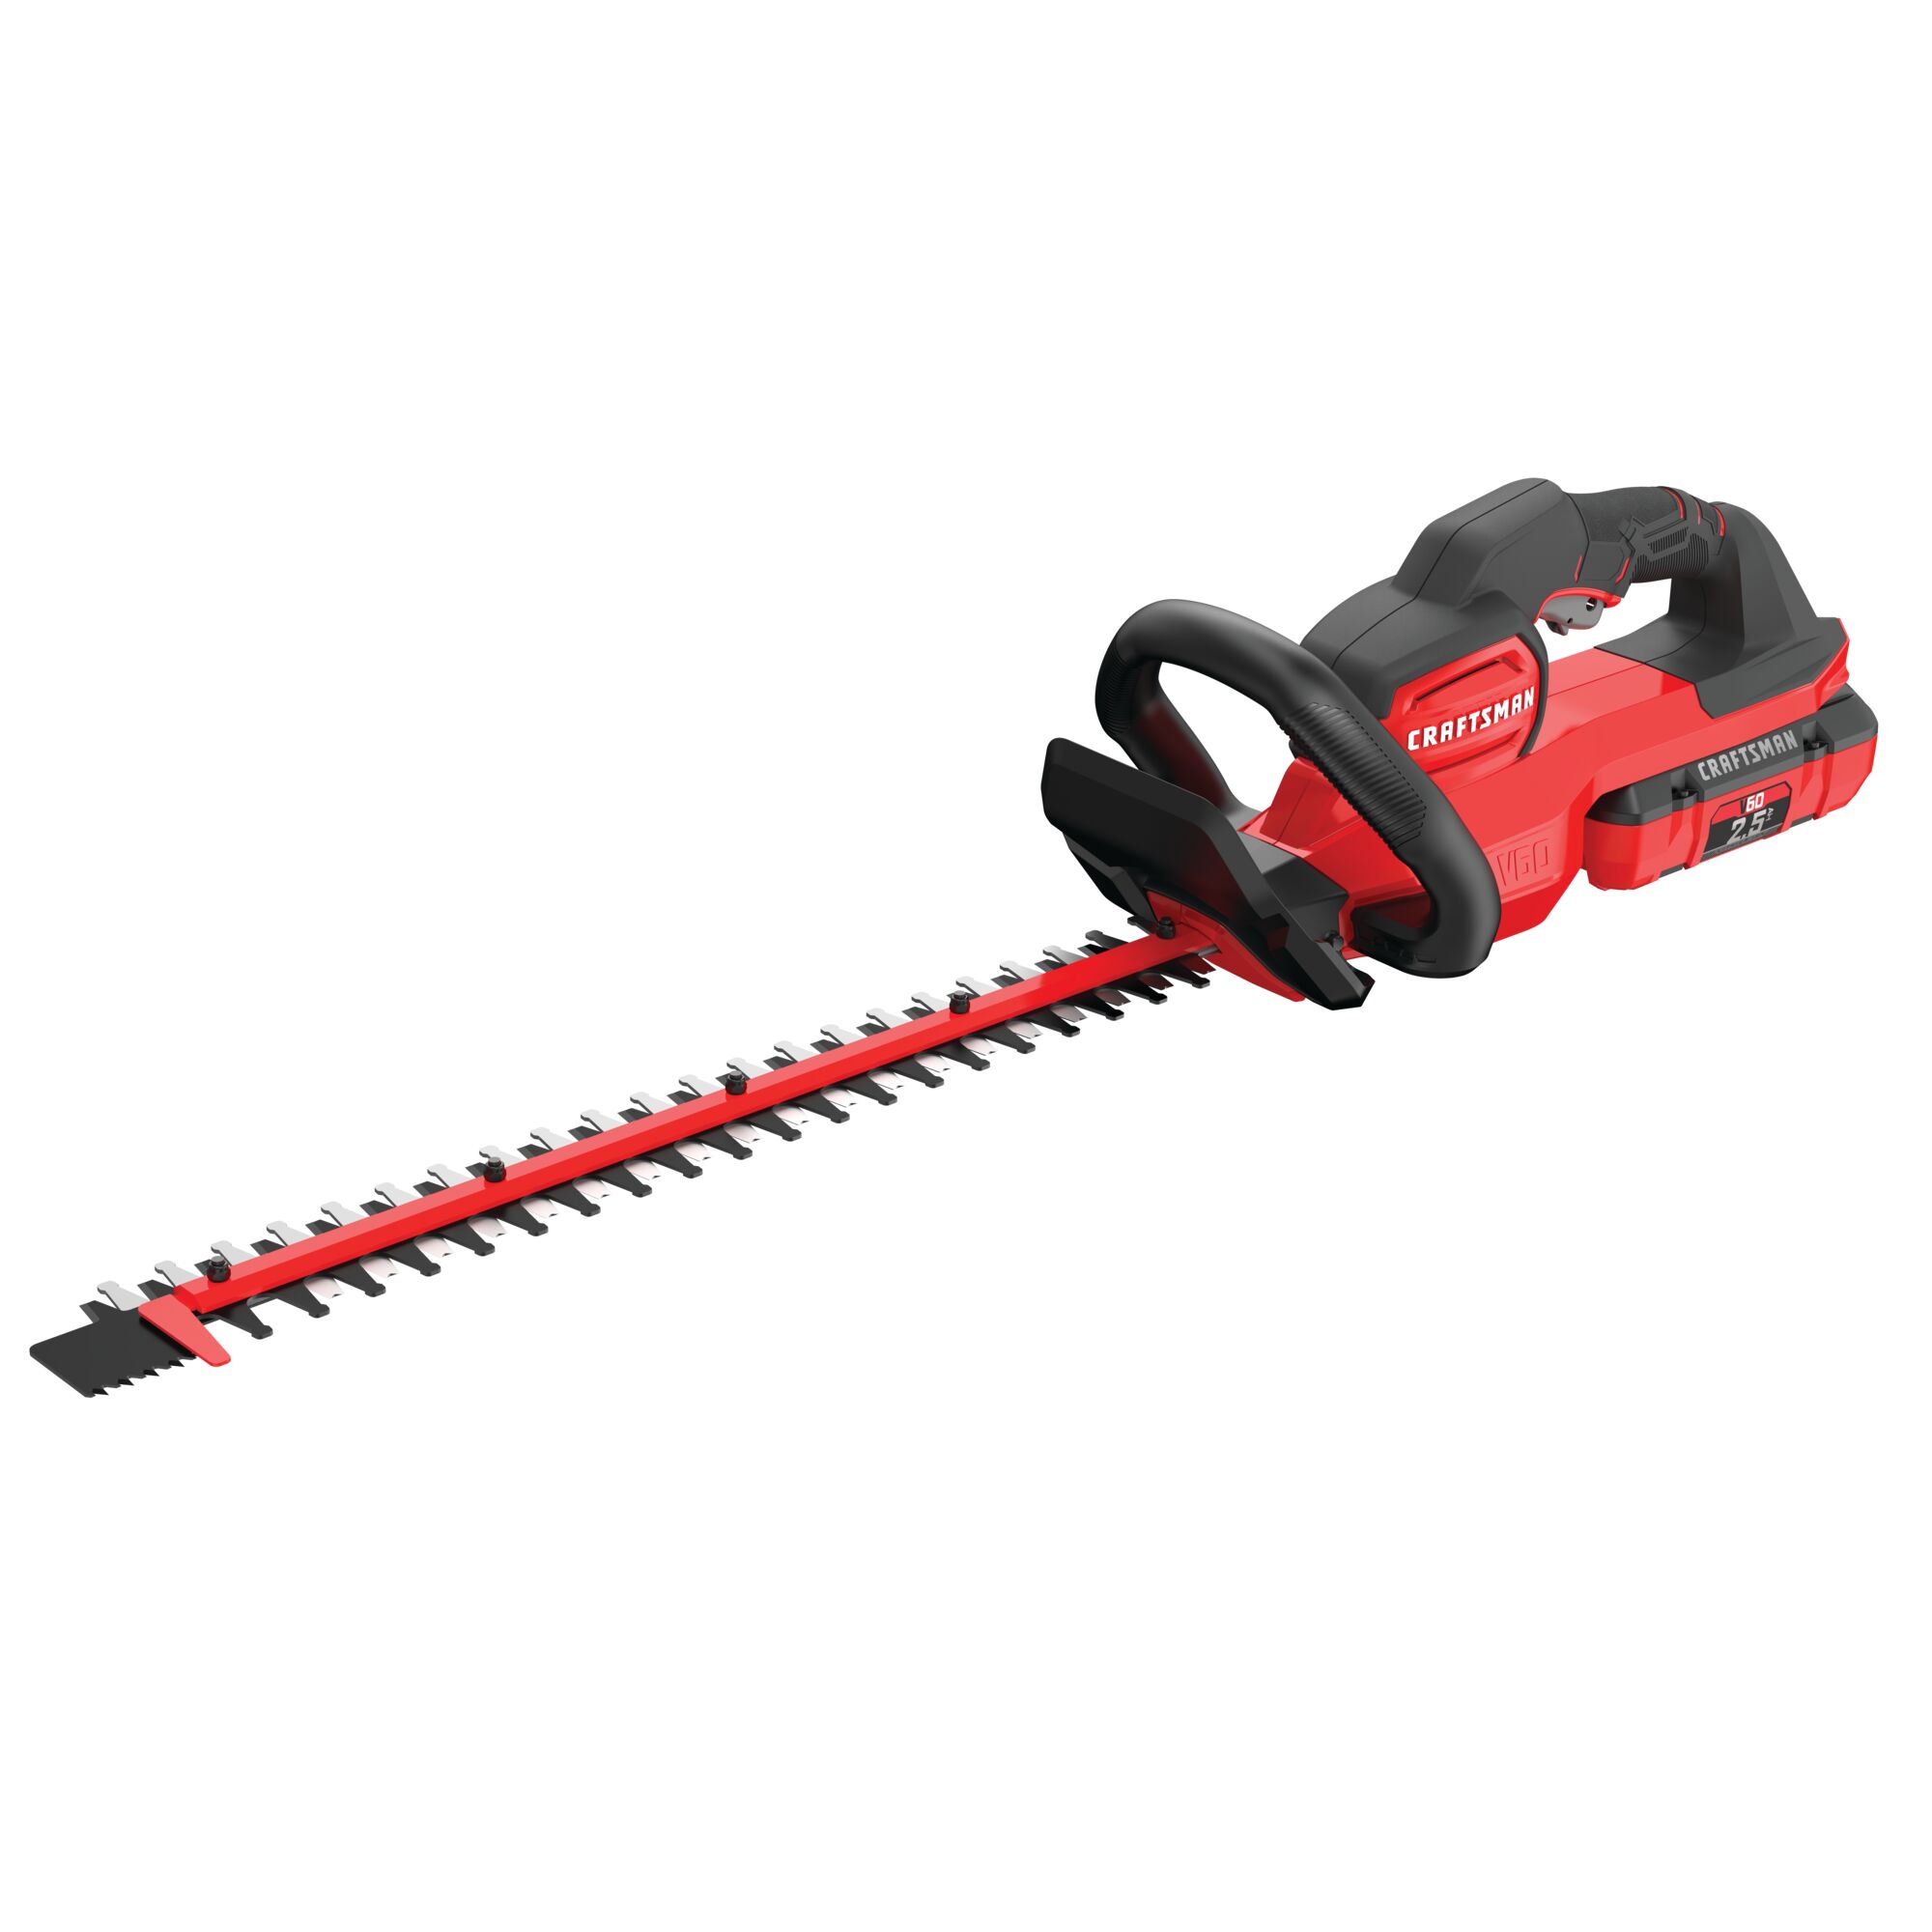 Cordless 24 inch hedge trimmer kit 2.5 Ampere hours.